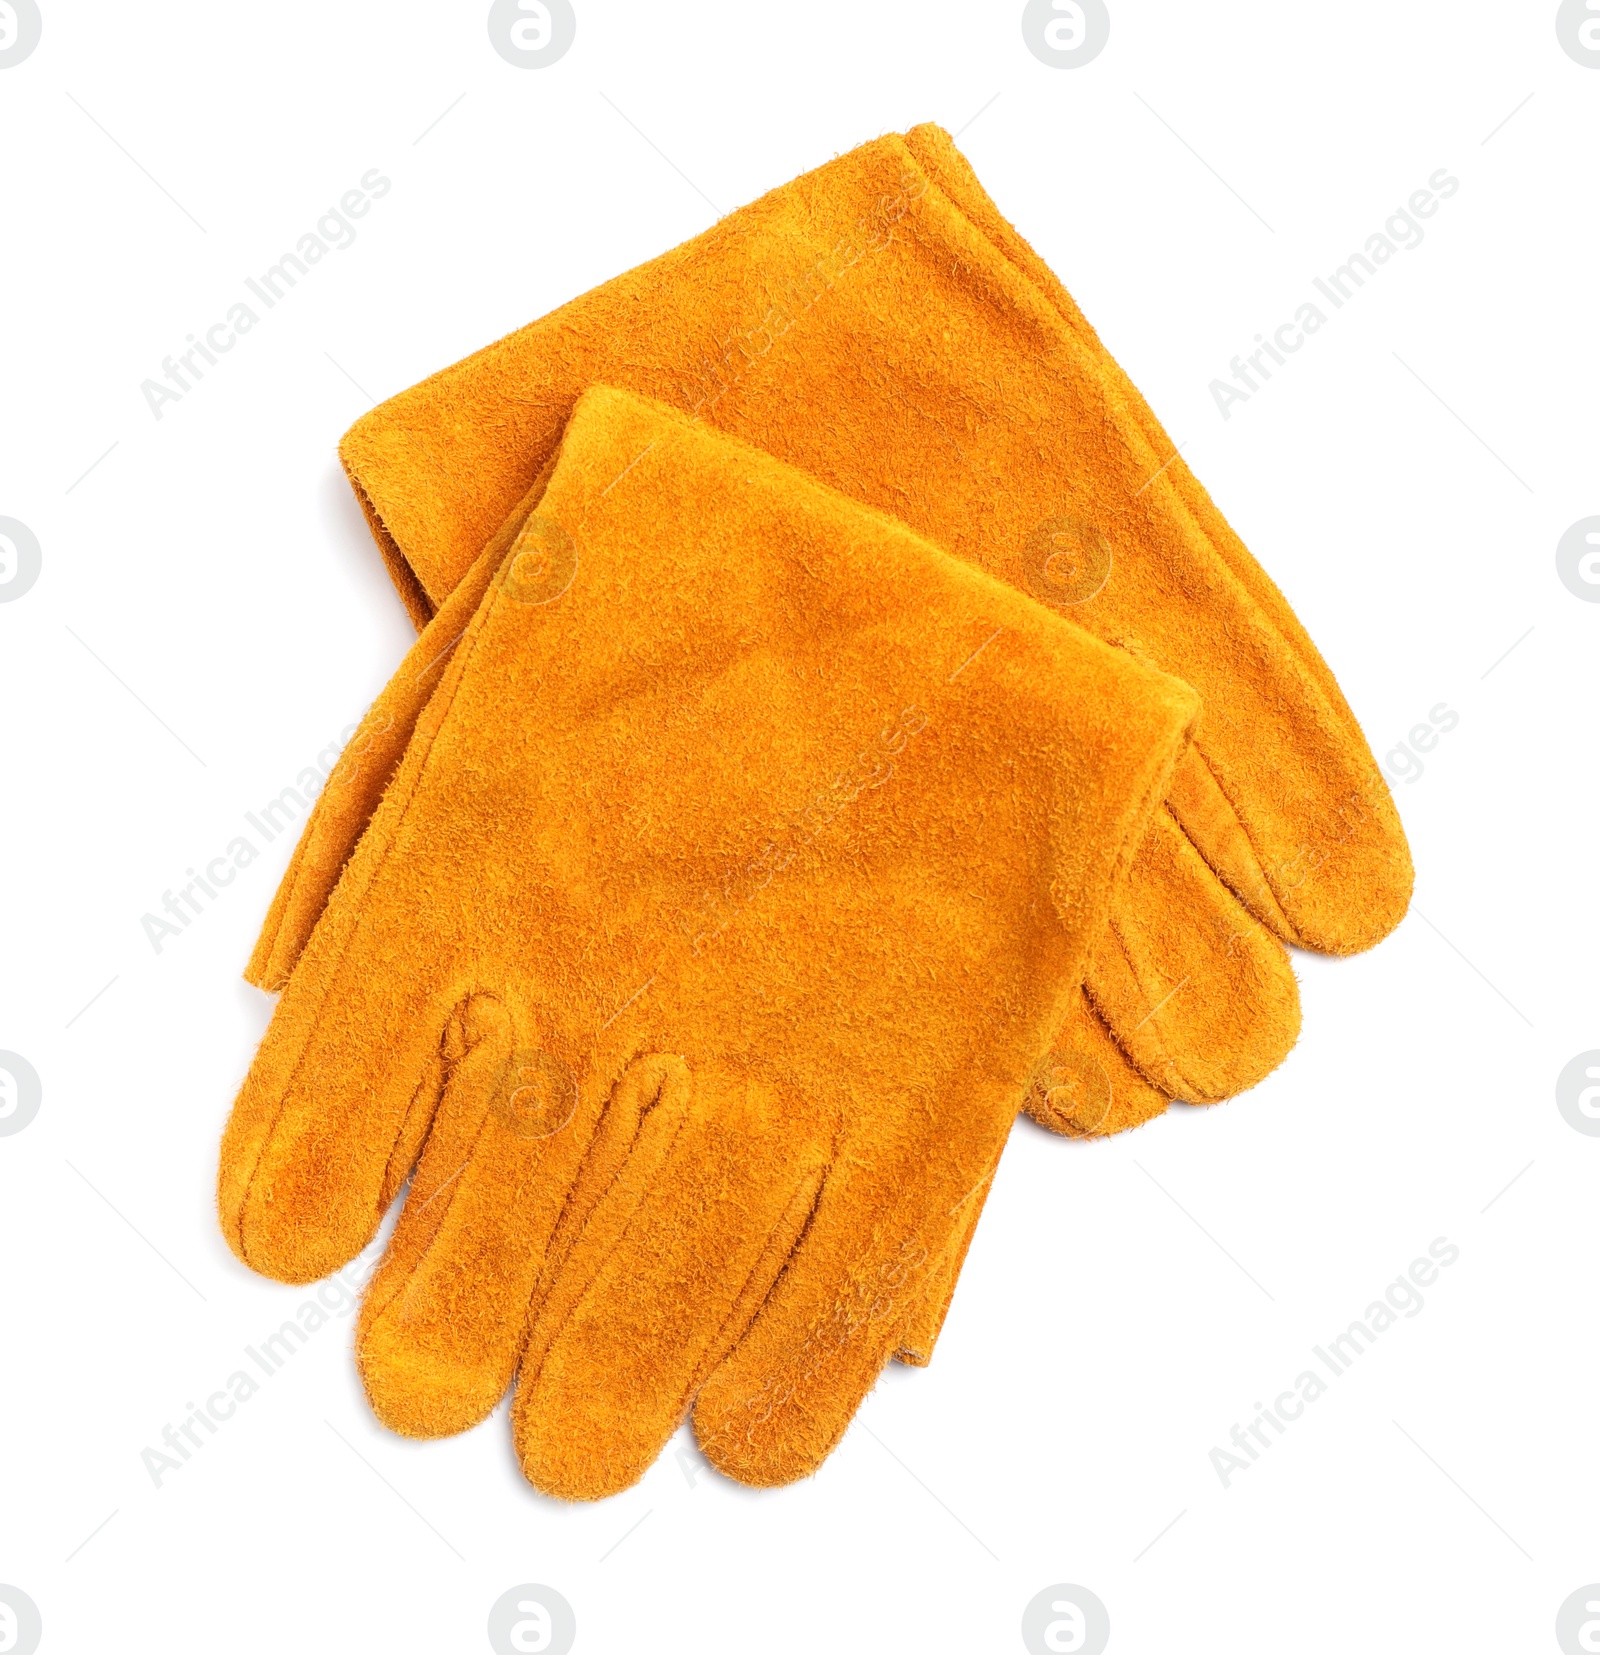 Photo of Orange protective gloves on white background, top view. Safety equipment